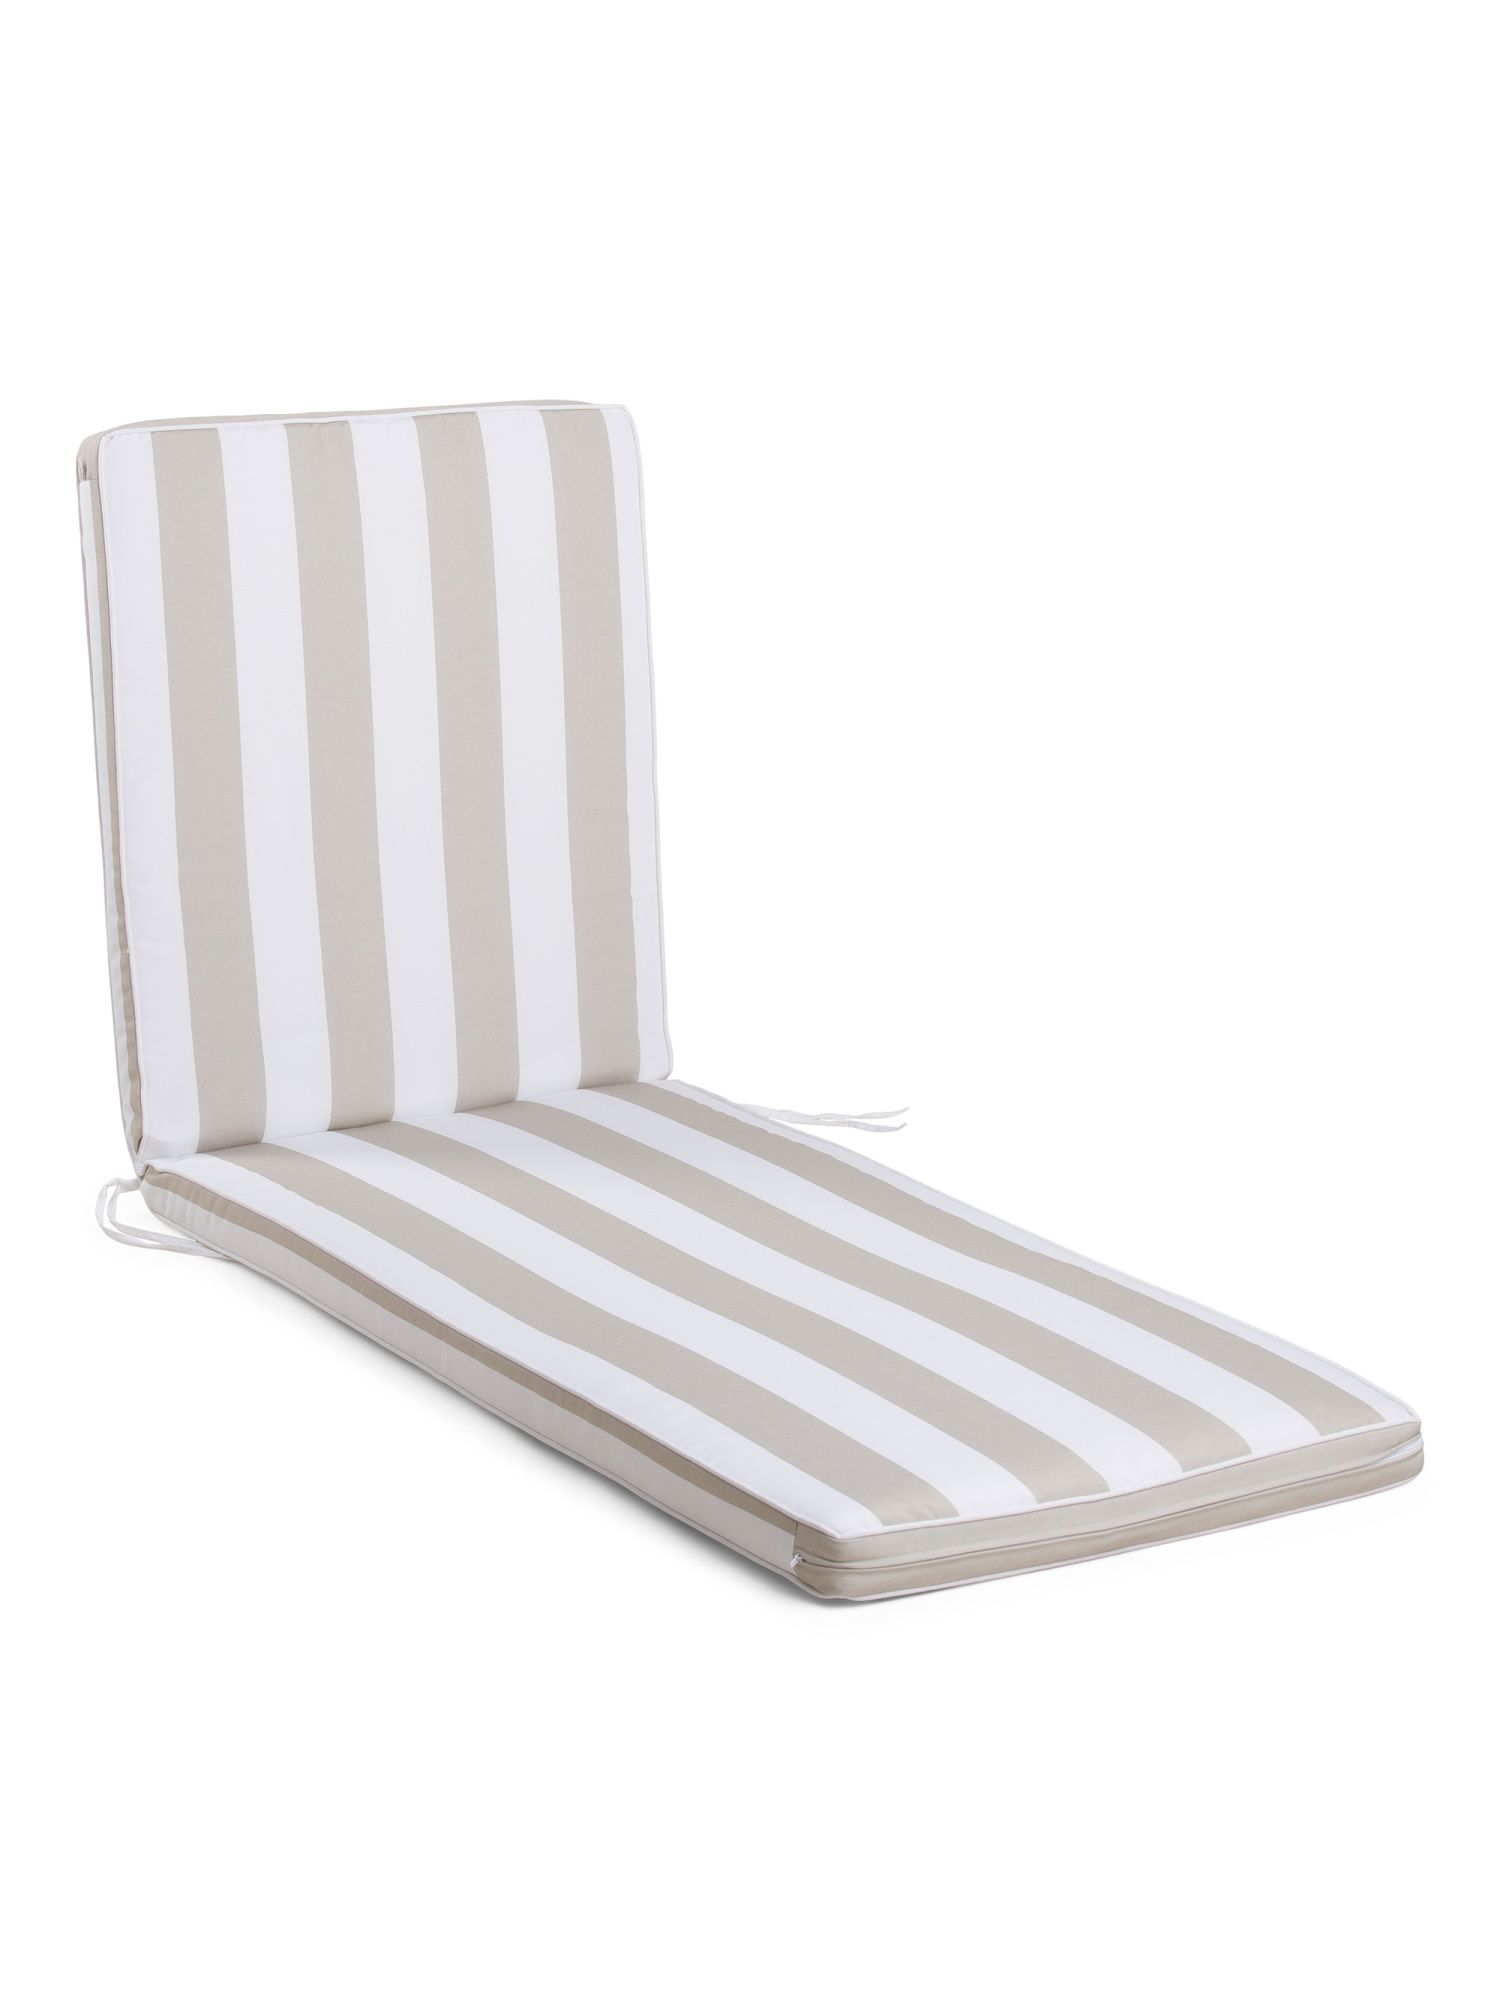 80x24 Outdoor Cabana Striped Chaise Lounger | TJ Maxx